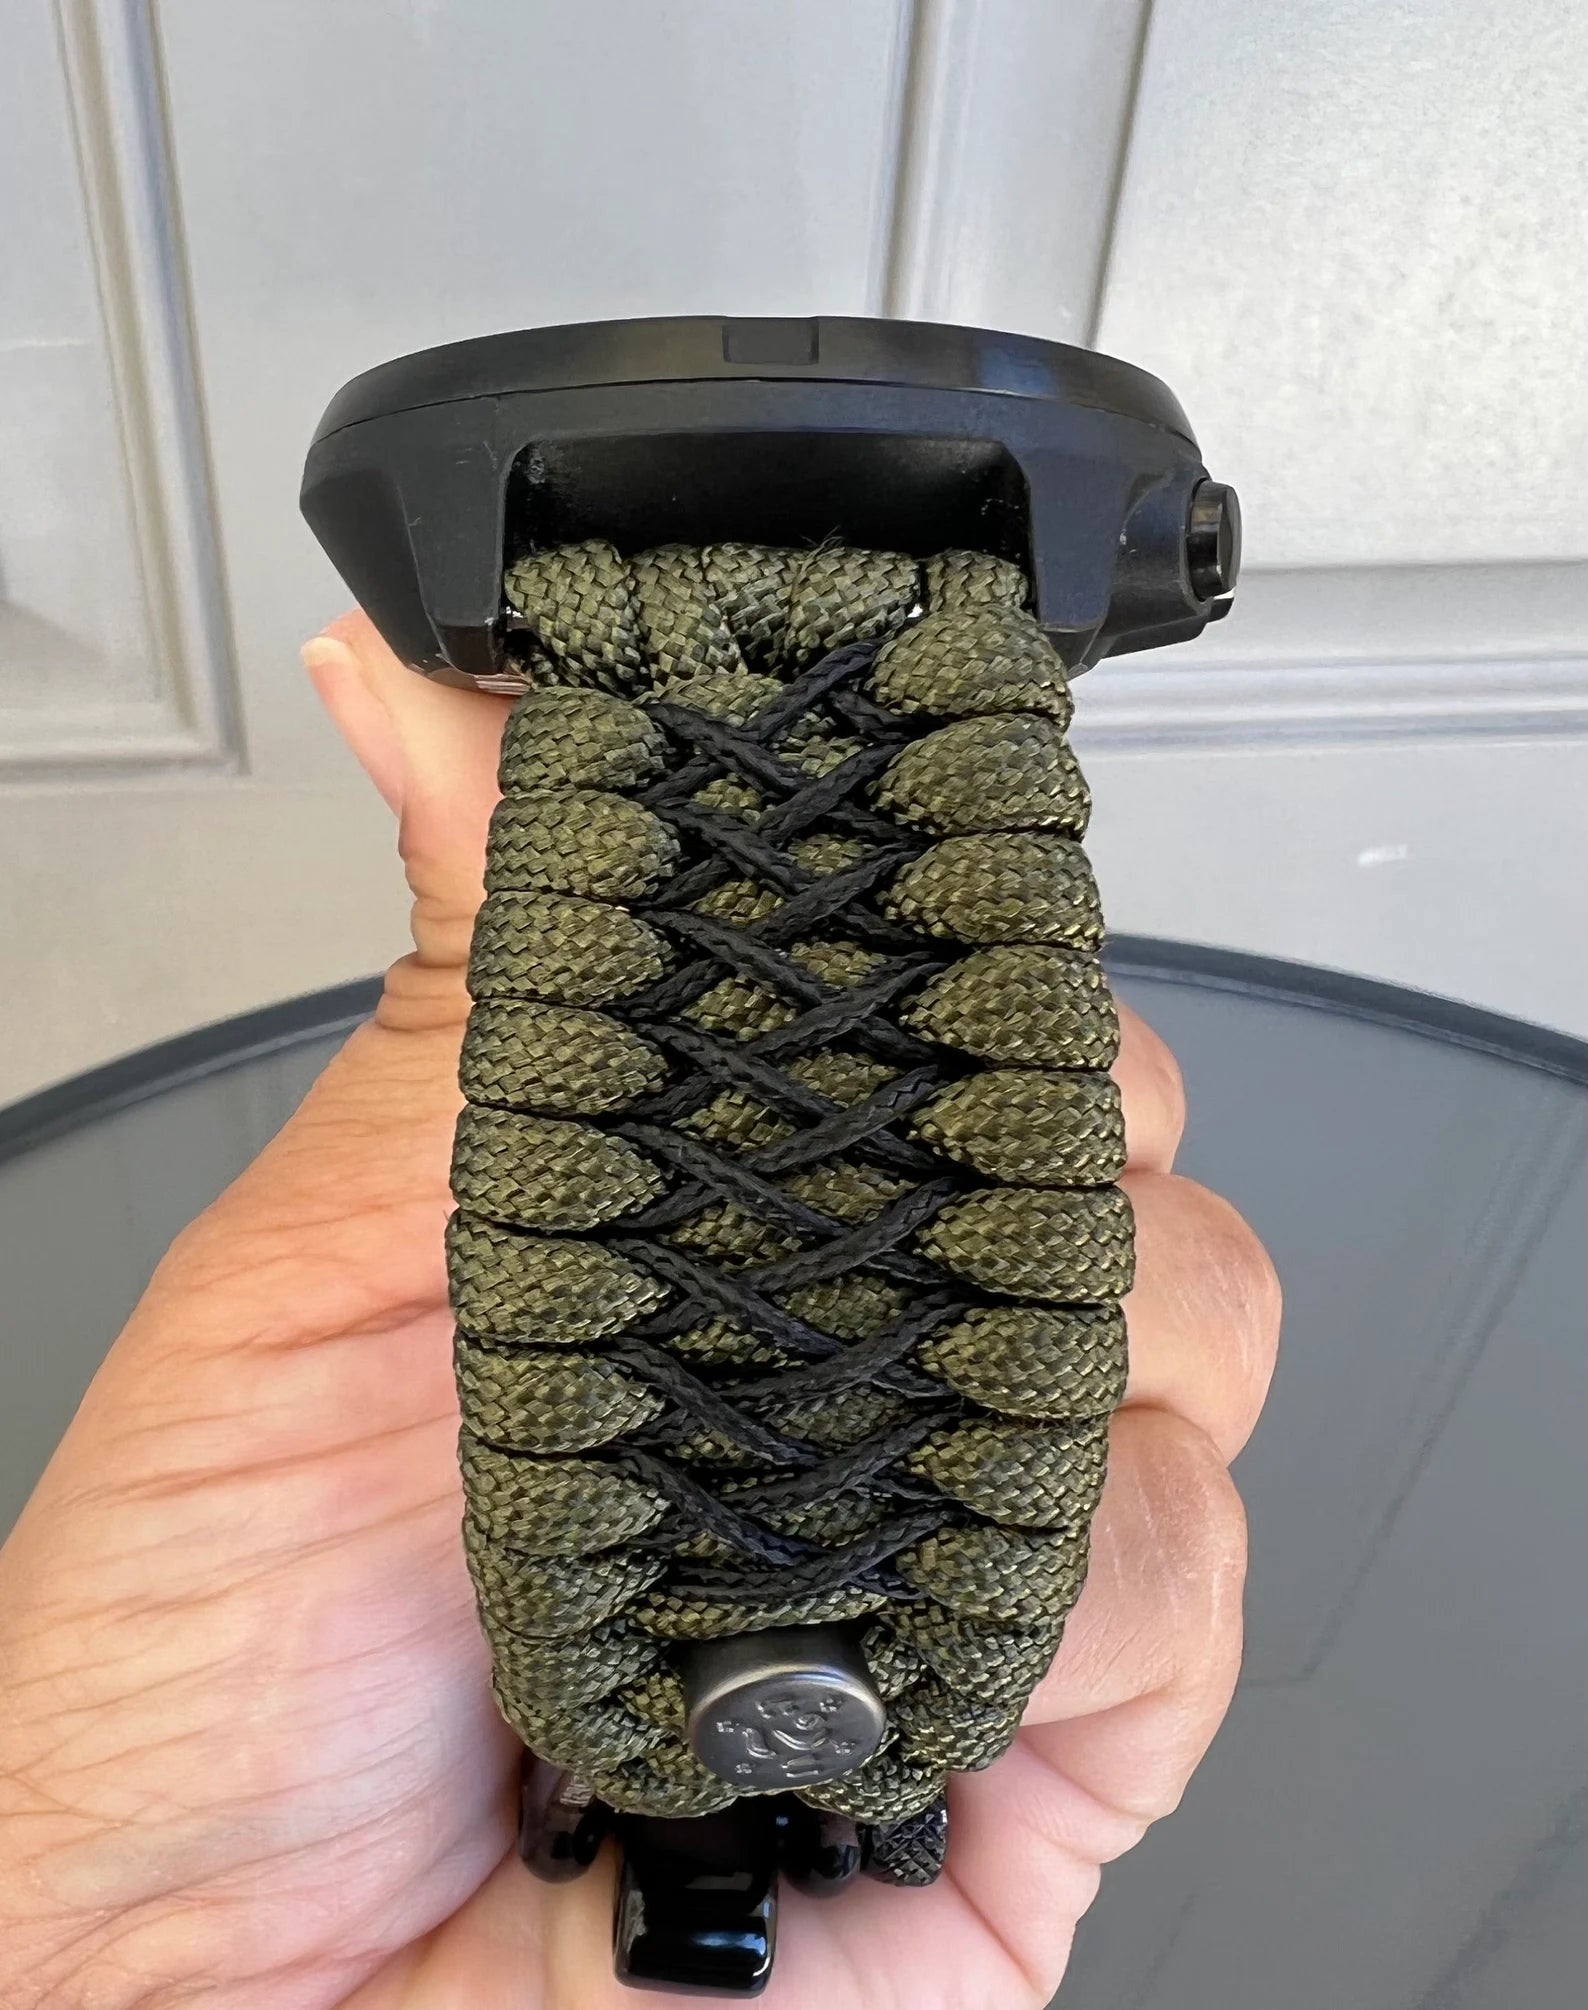 Paracord Watch Band for Suunto Watch, Suunto 9/baro, Suunto 7, Suunto  Spartan Sport Hr/baro, Suunto D5 watch Not Included 